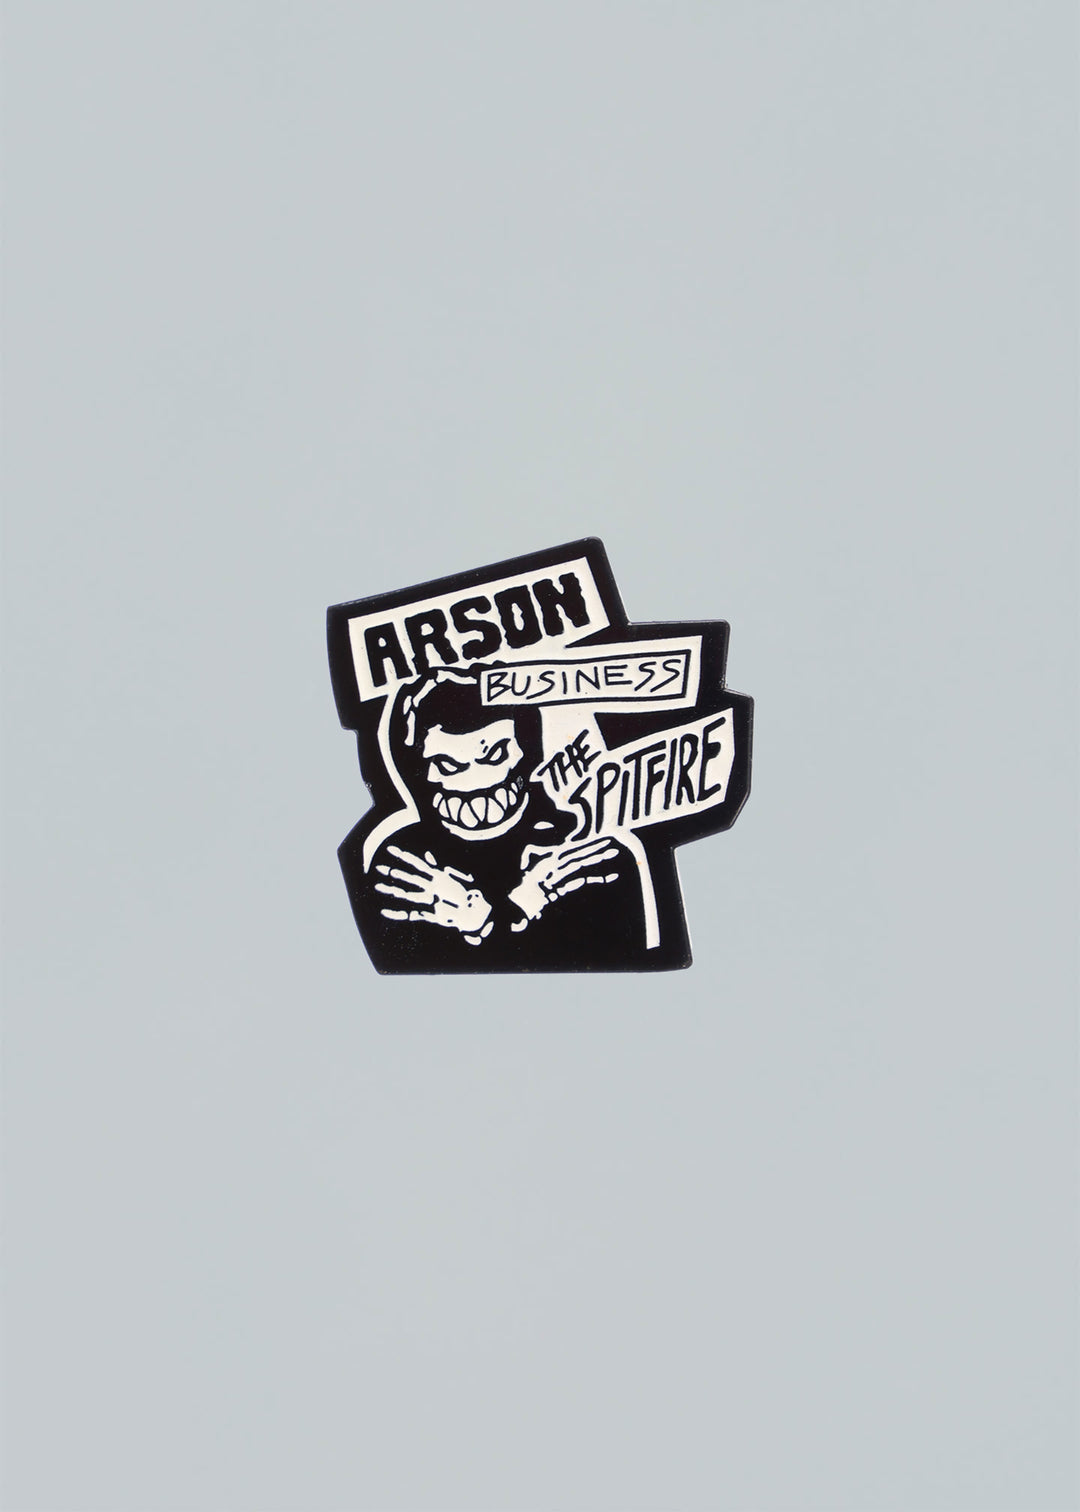 Spitfire Arson Business Pin